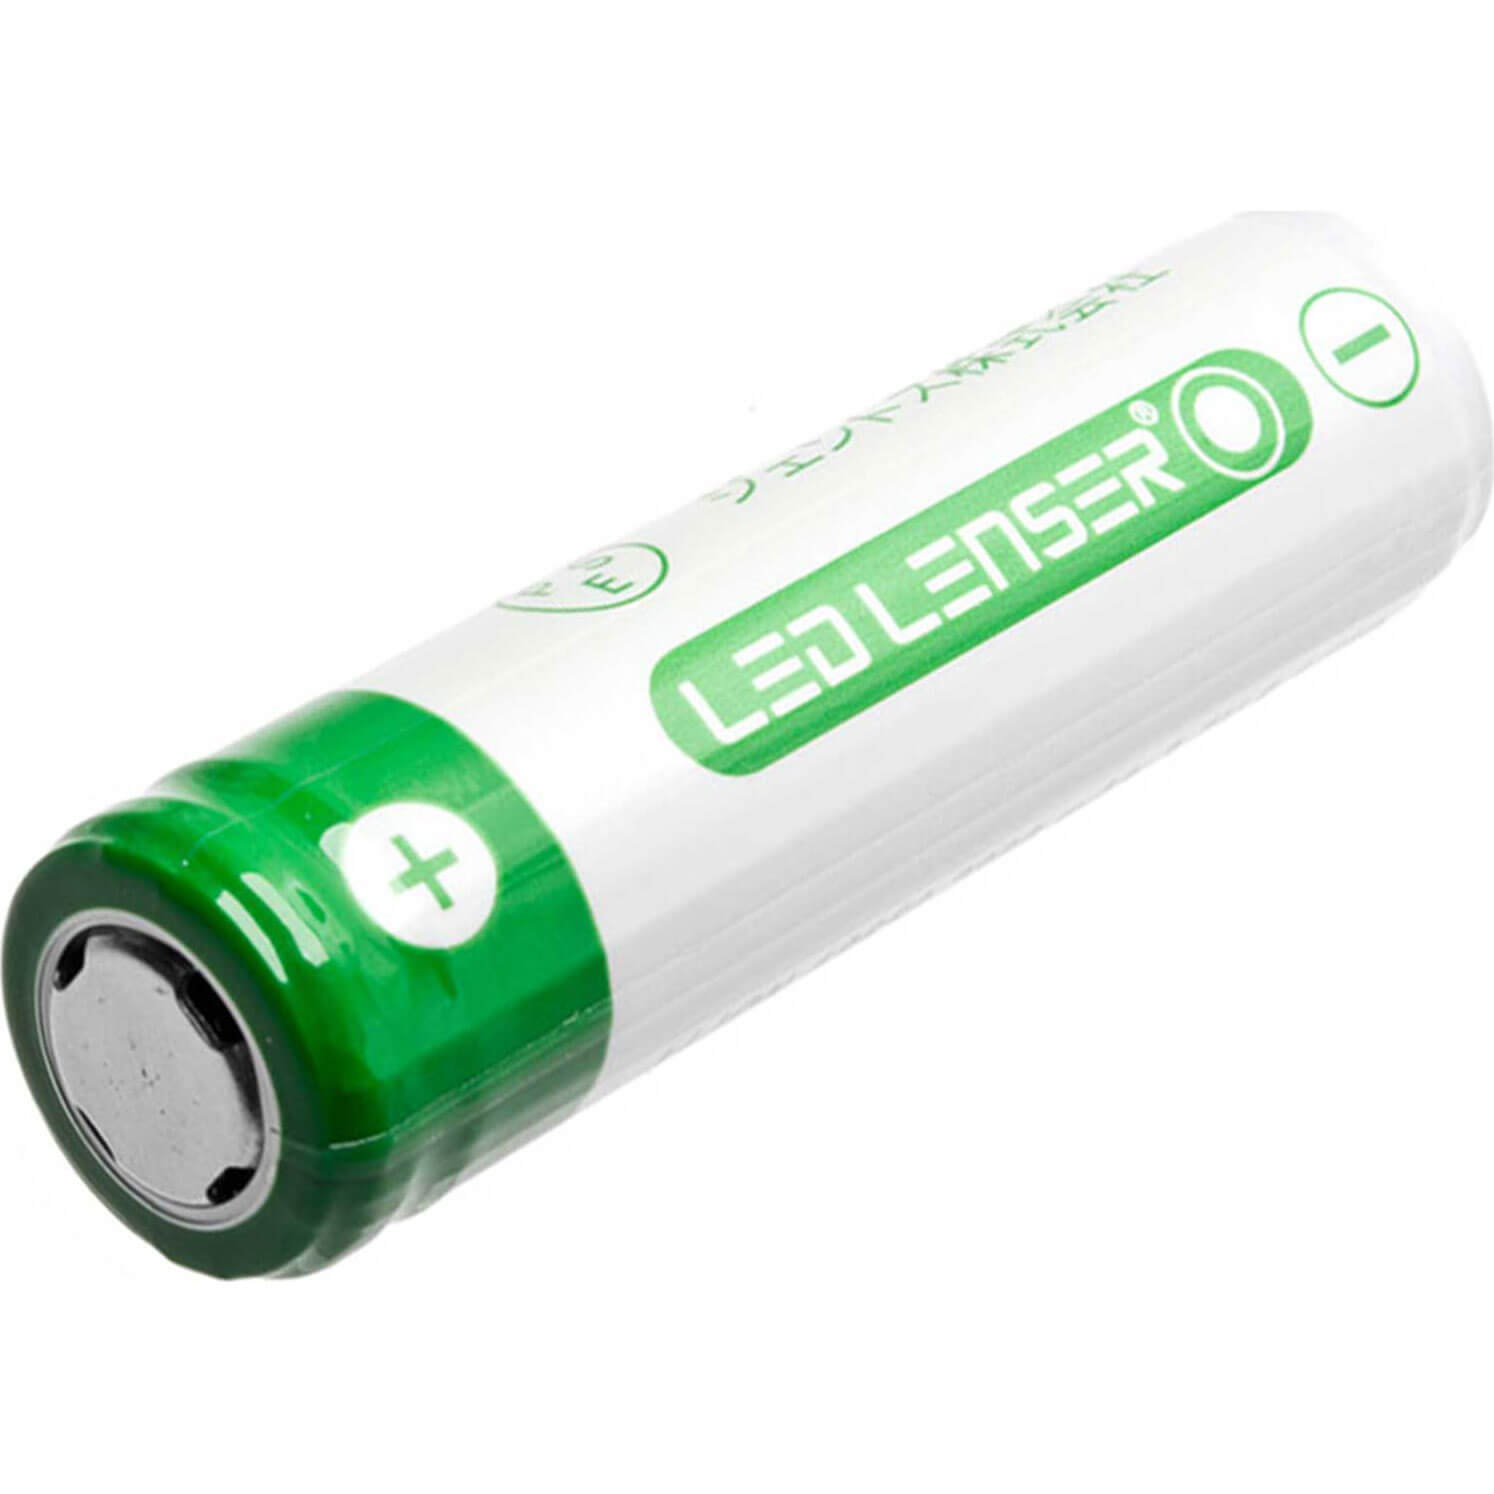 Led Lenser Genuine Rechargeable Battery For Ih8r H8r And P7r Torches Batteries